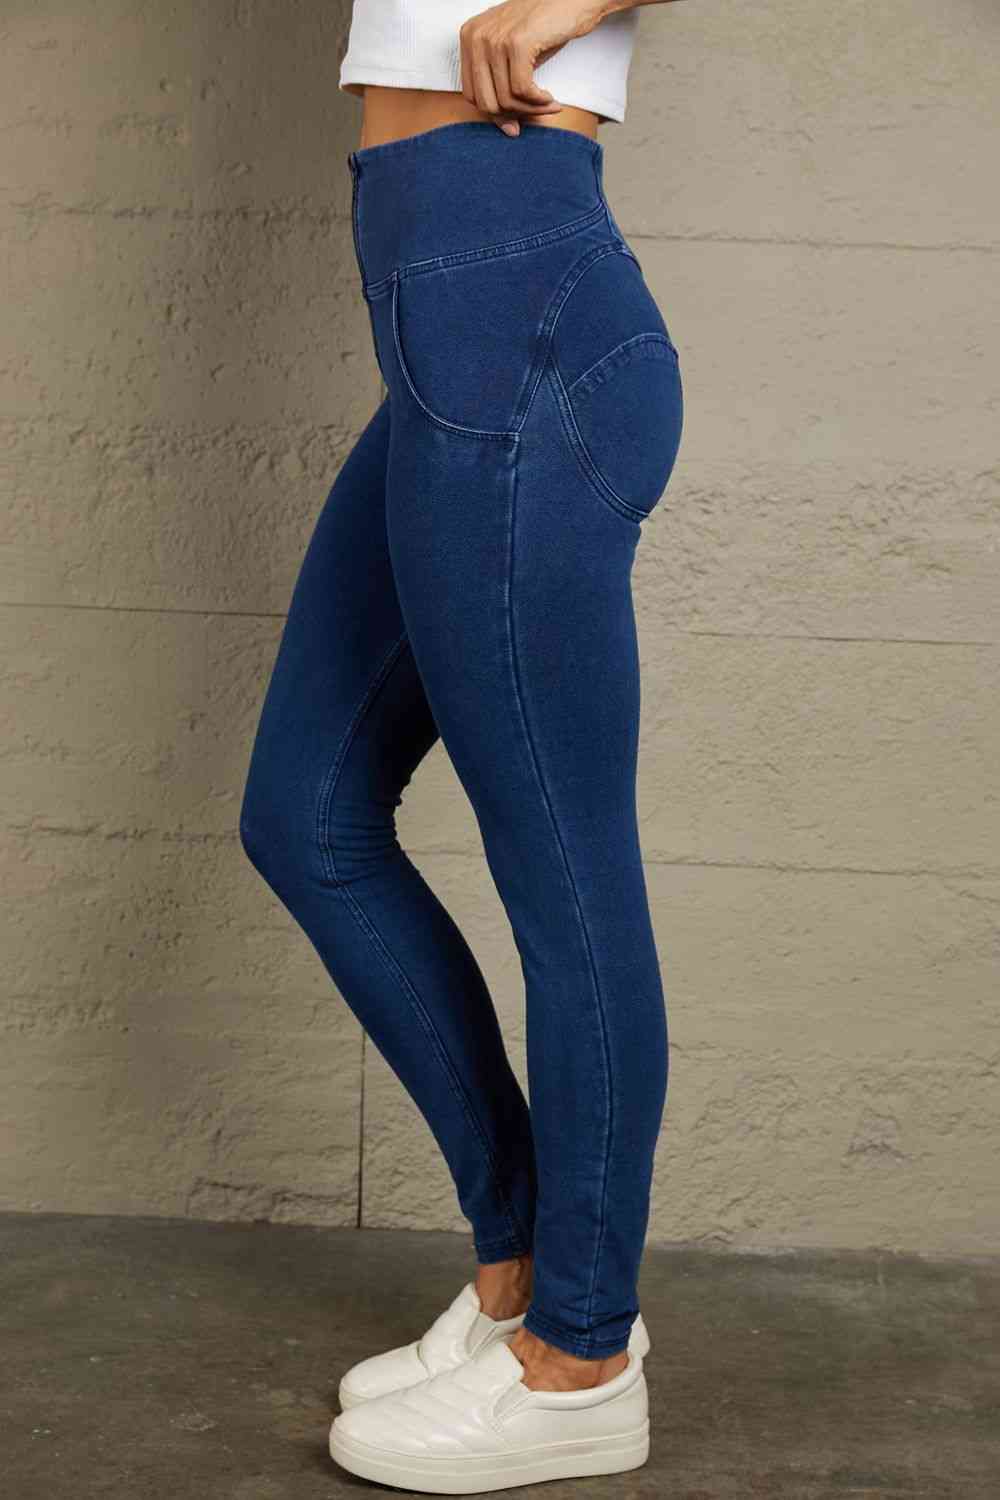 Dim Gray Baeful High Waist Zip Up Skinny Long Jeans Sentient Beauty Fashions Apparel & Accessories